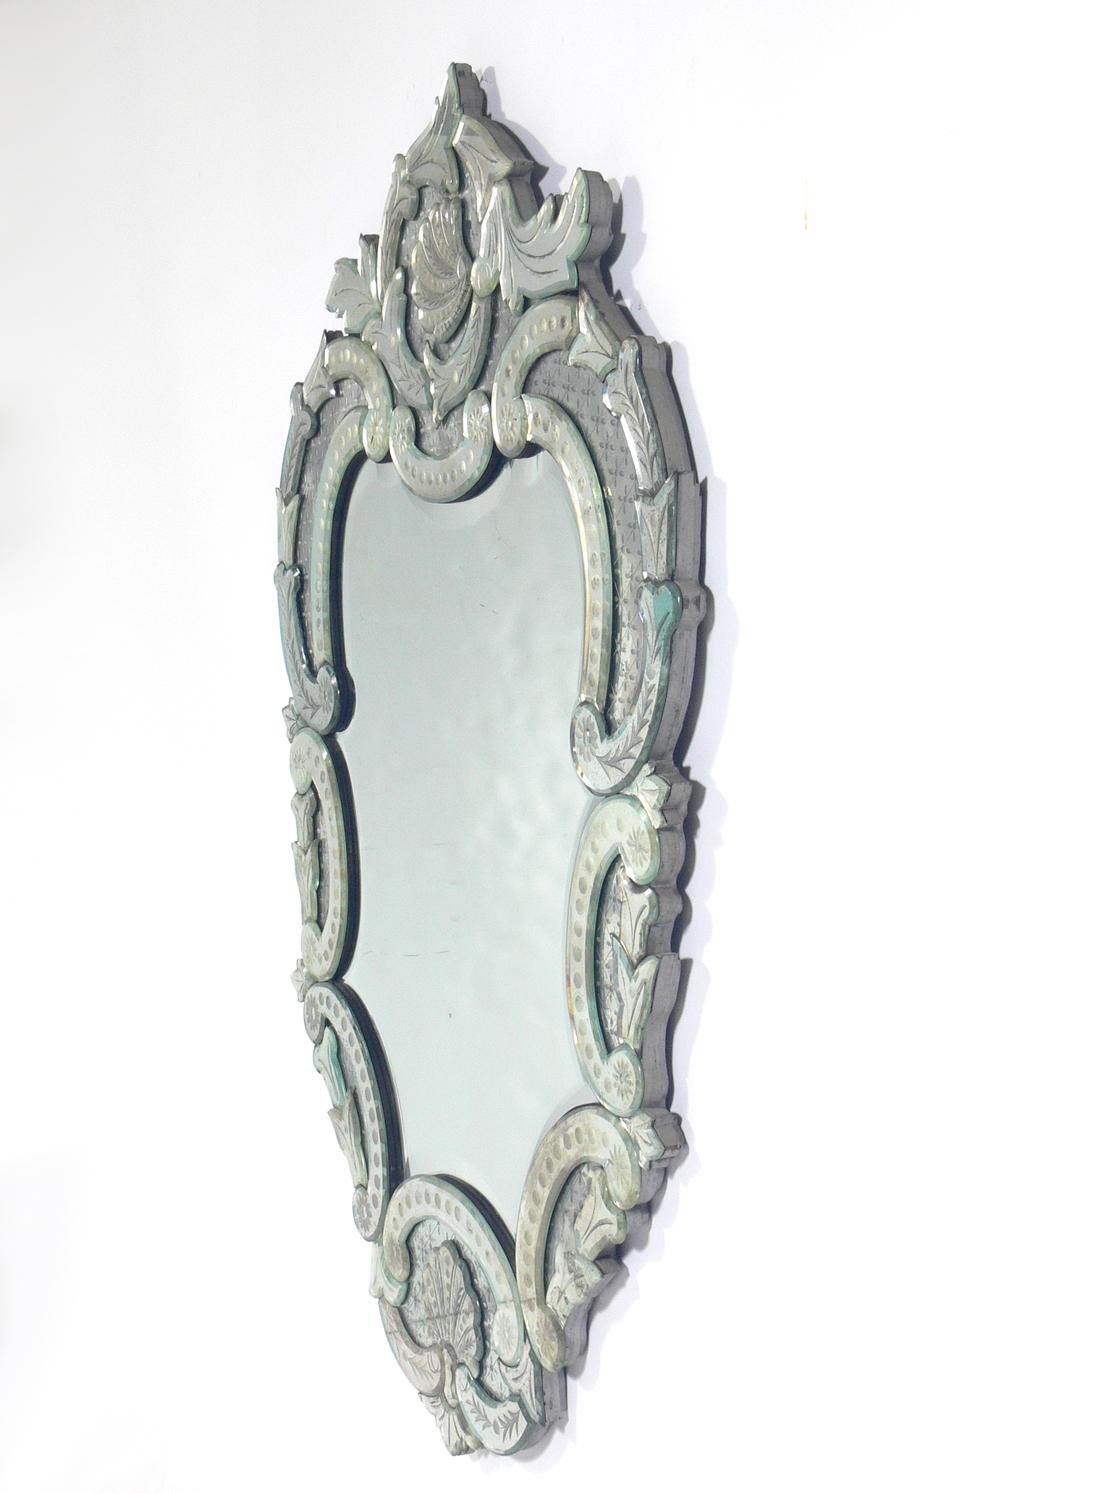 Large Ornate Venetian Mirror, Italy, circa 1950s. Retains wonderful original patina that only comes with age.